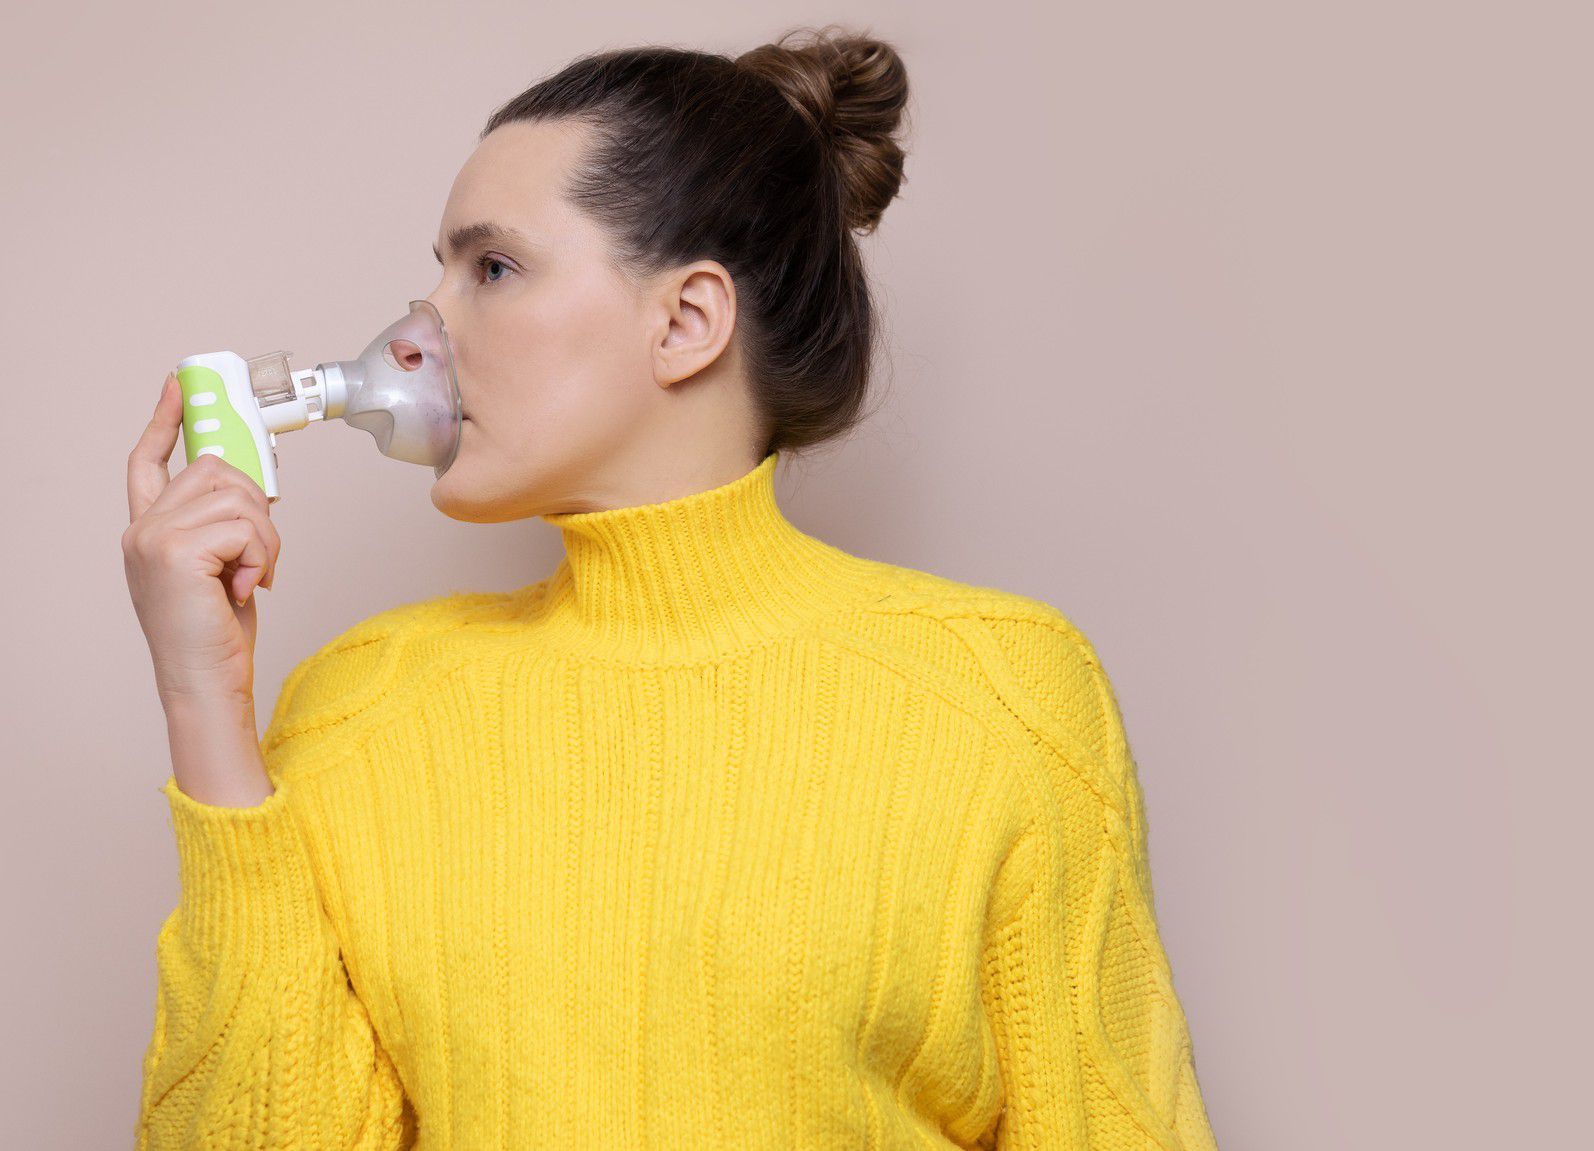 Can asthma be affected by what you eat?